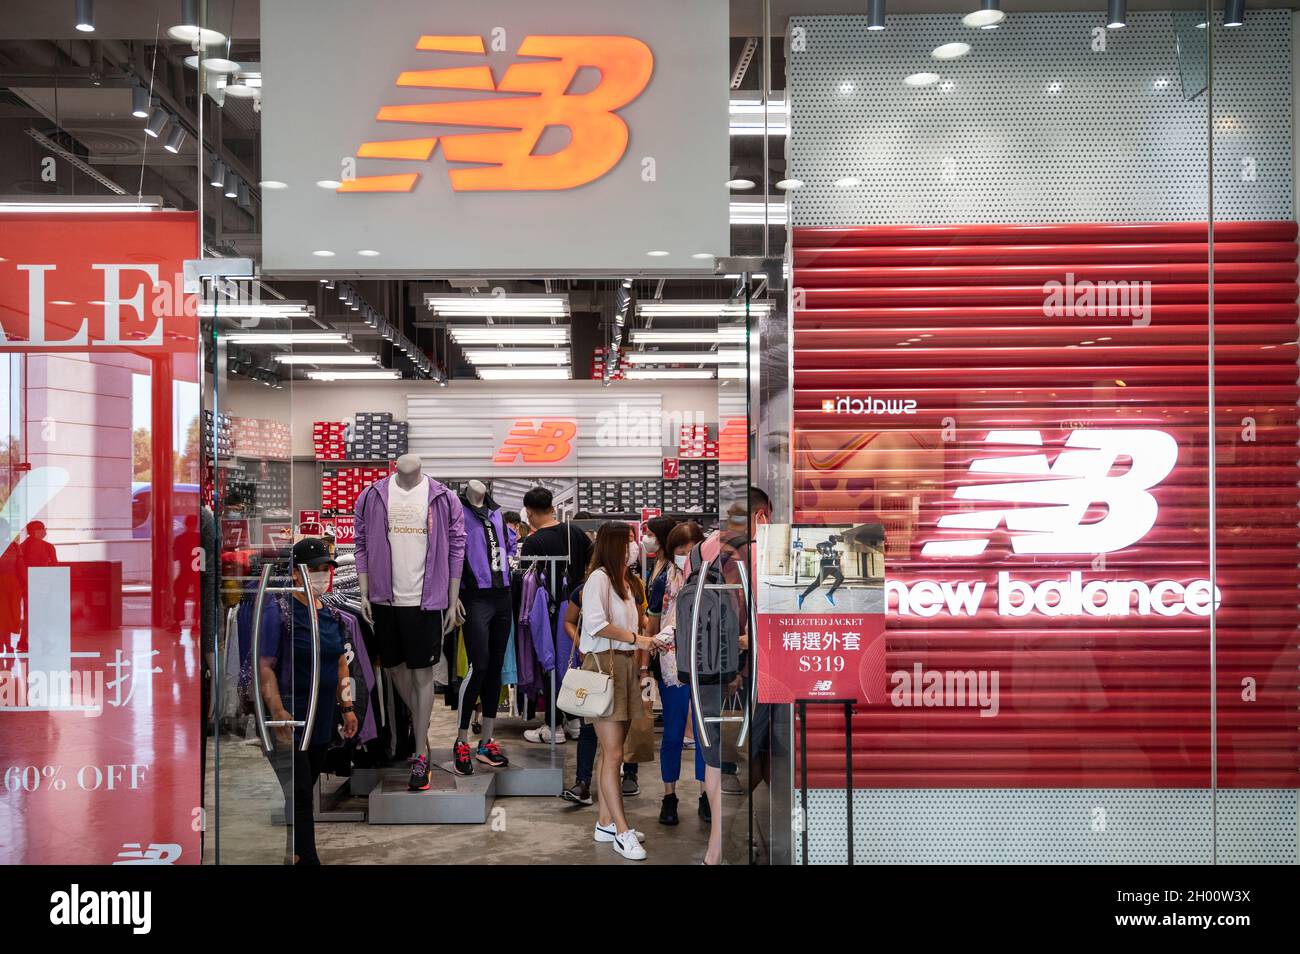 New balance logo brand hi-res stock photography and images - Alamy